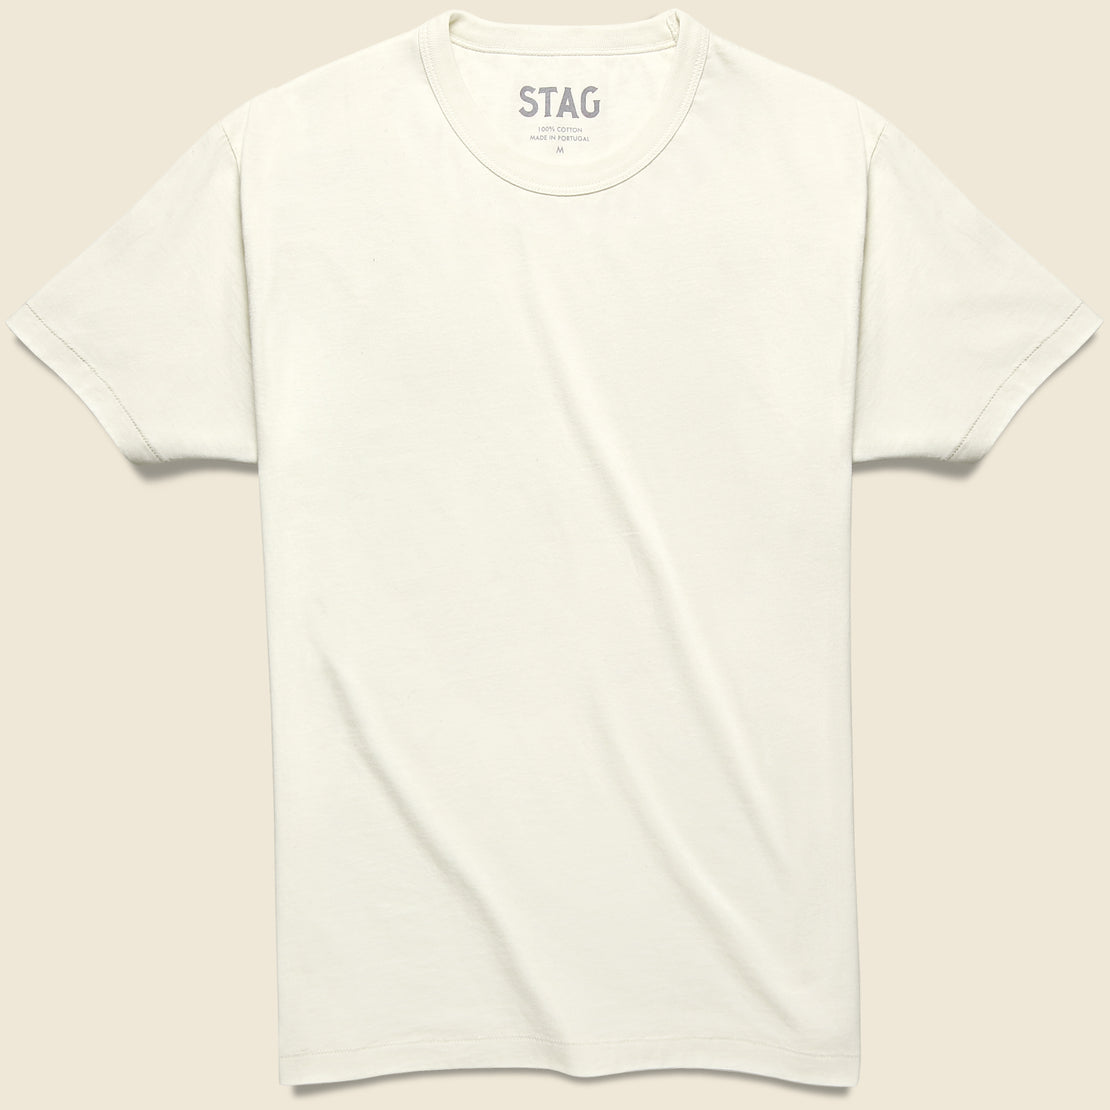 STAG STAG Tee - White